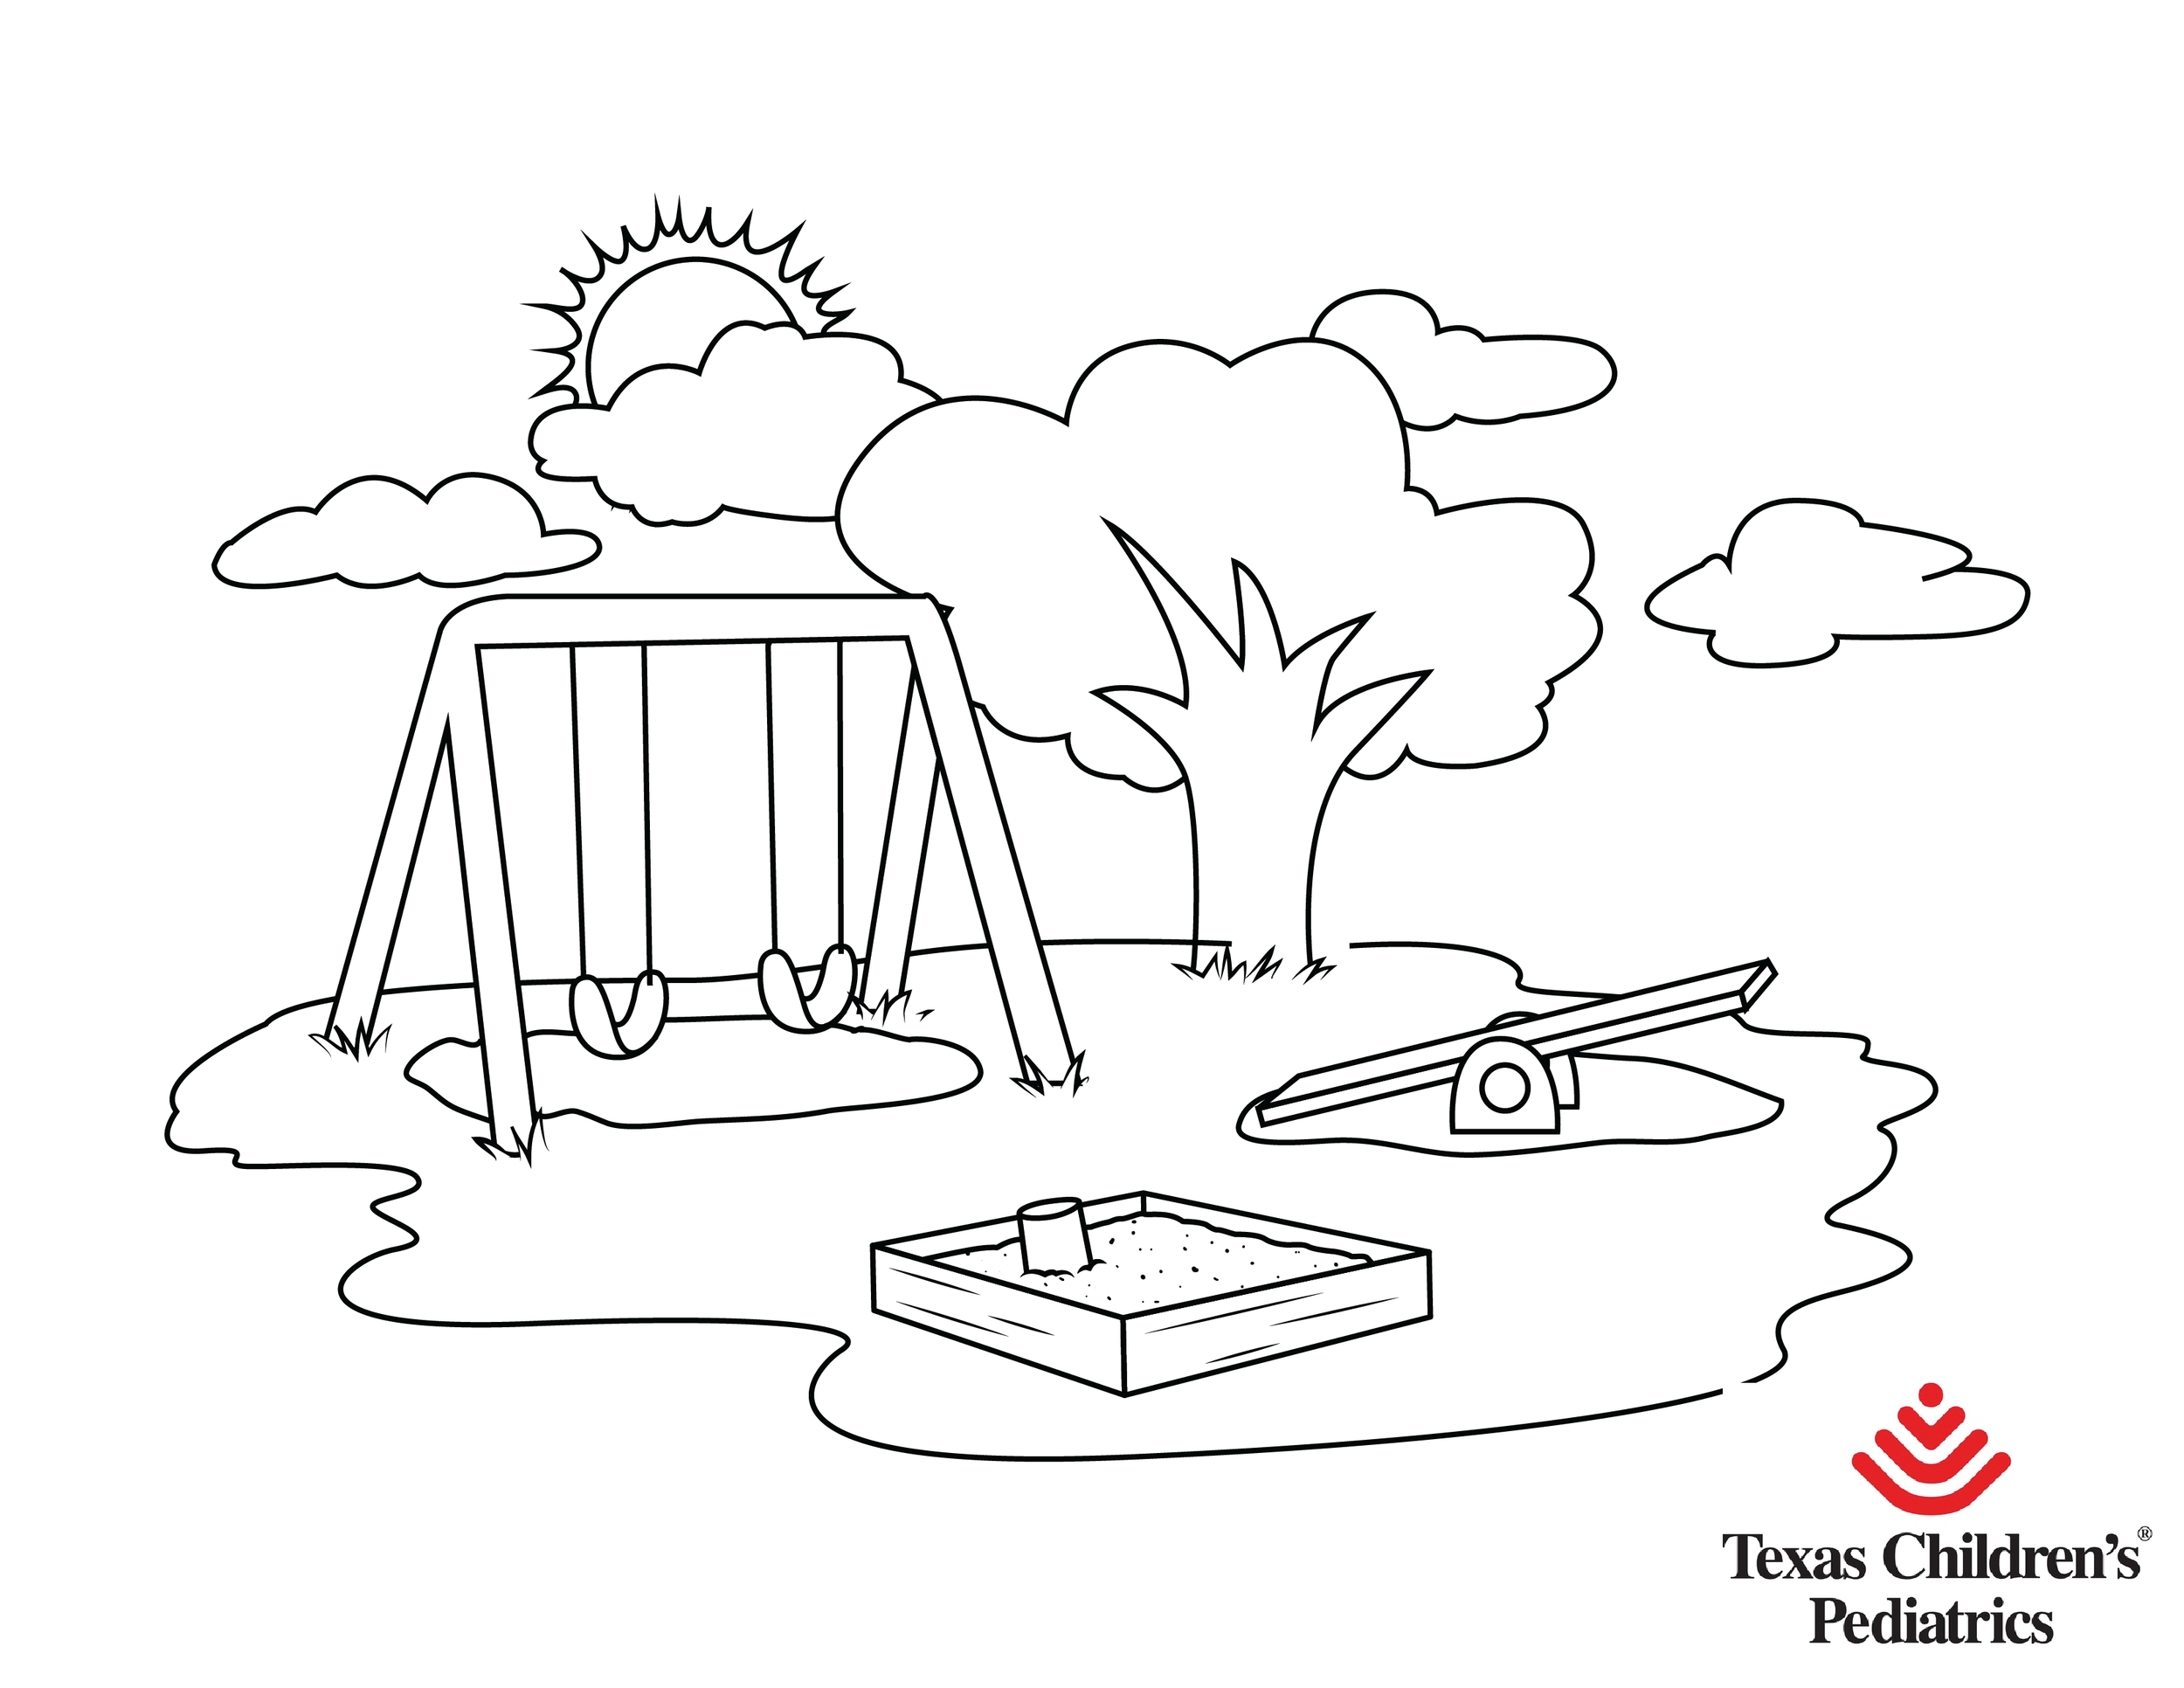 Playground_ColoringPage-01.png